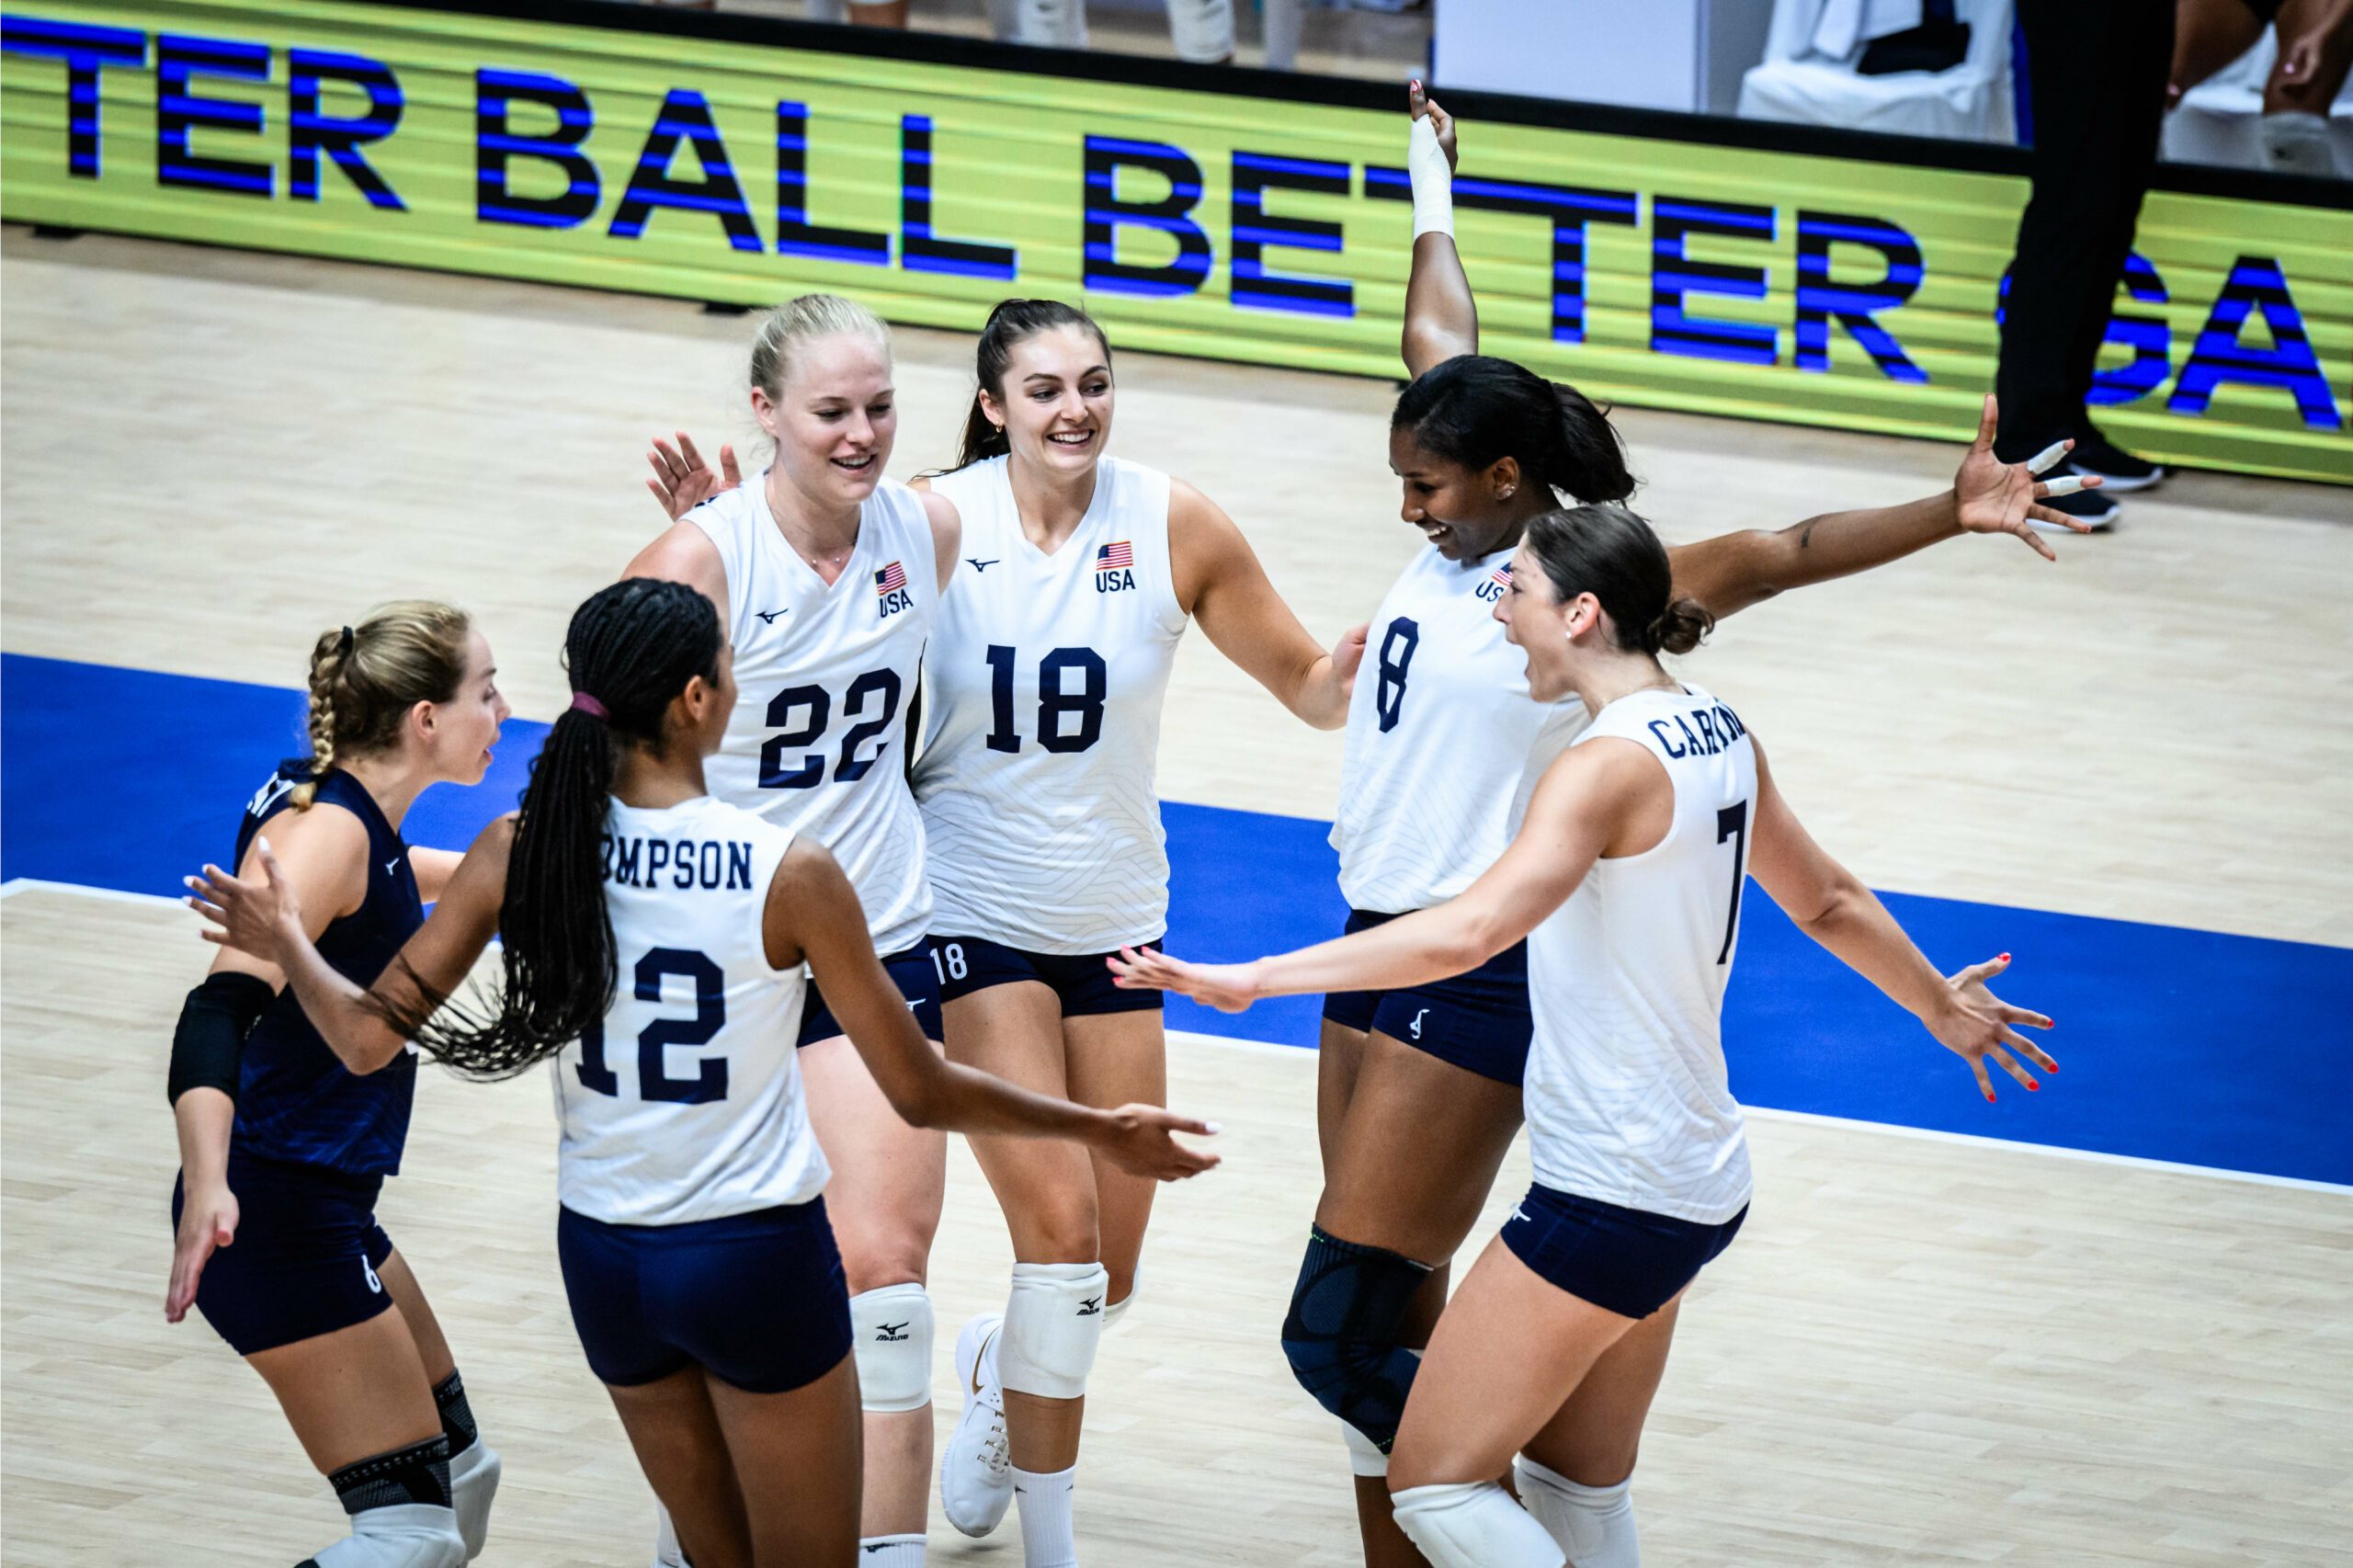 U.S. Women's National Team celebrating a point in win over Bulgaria.